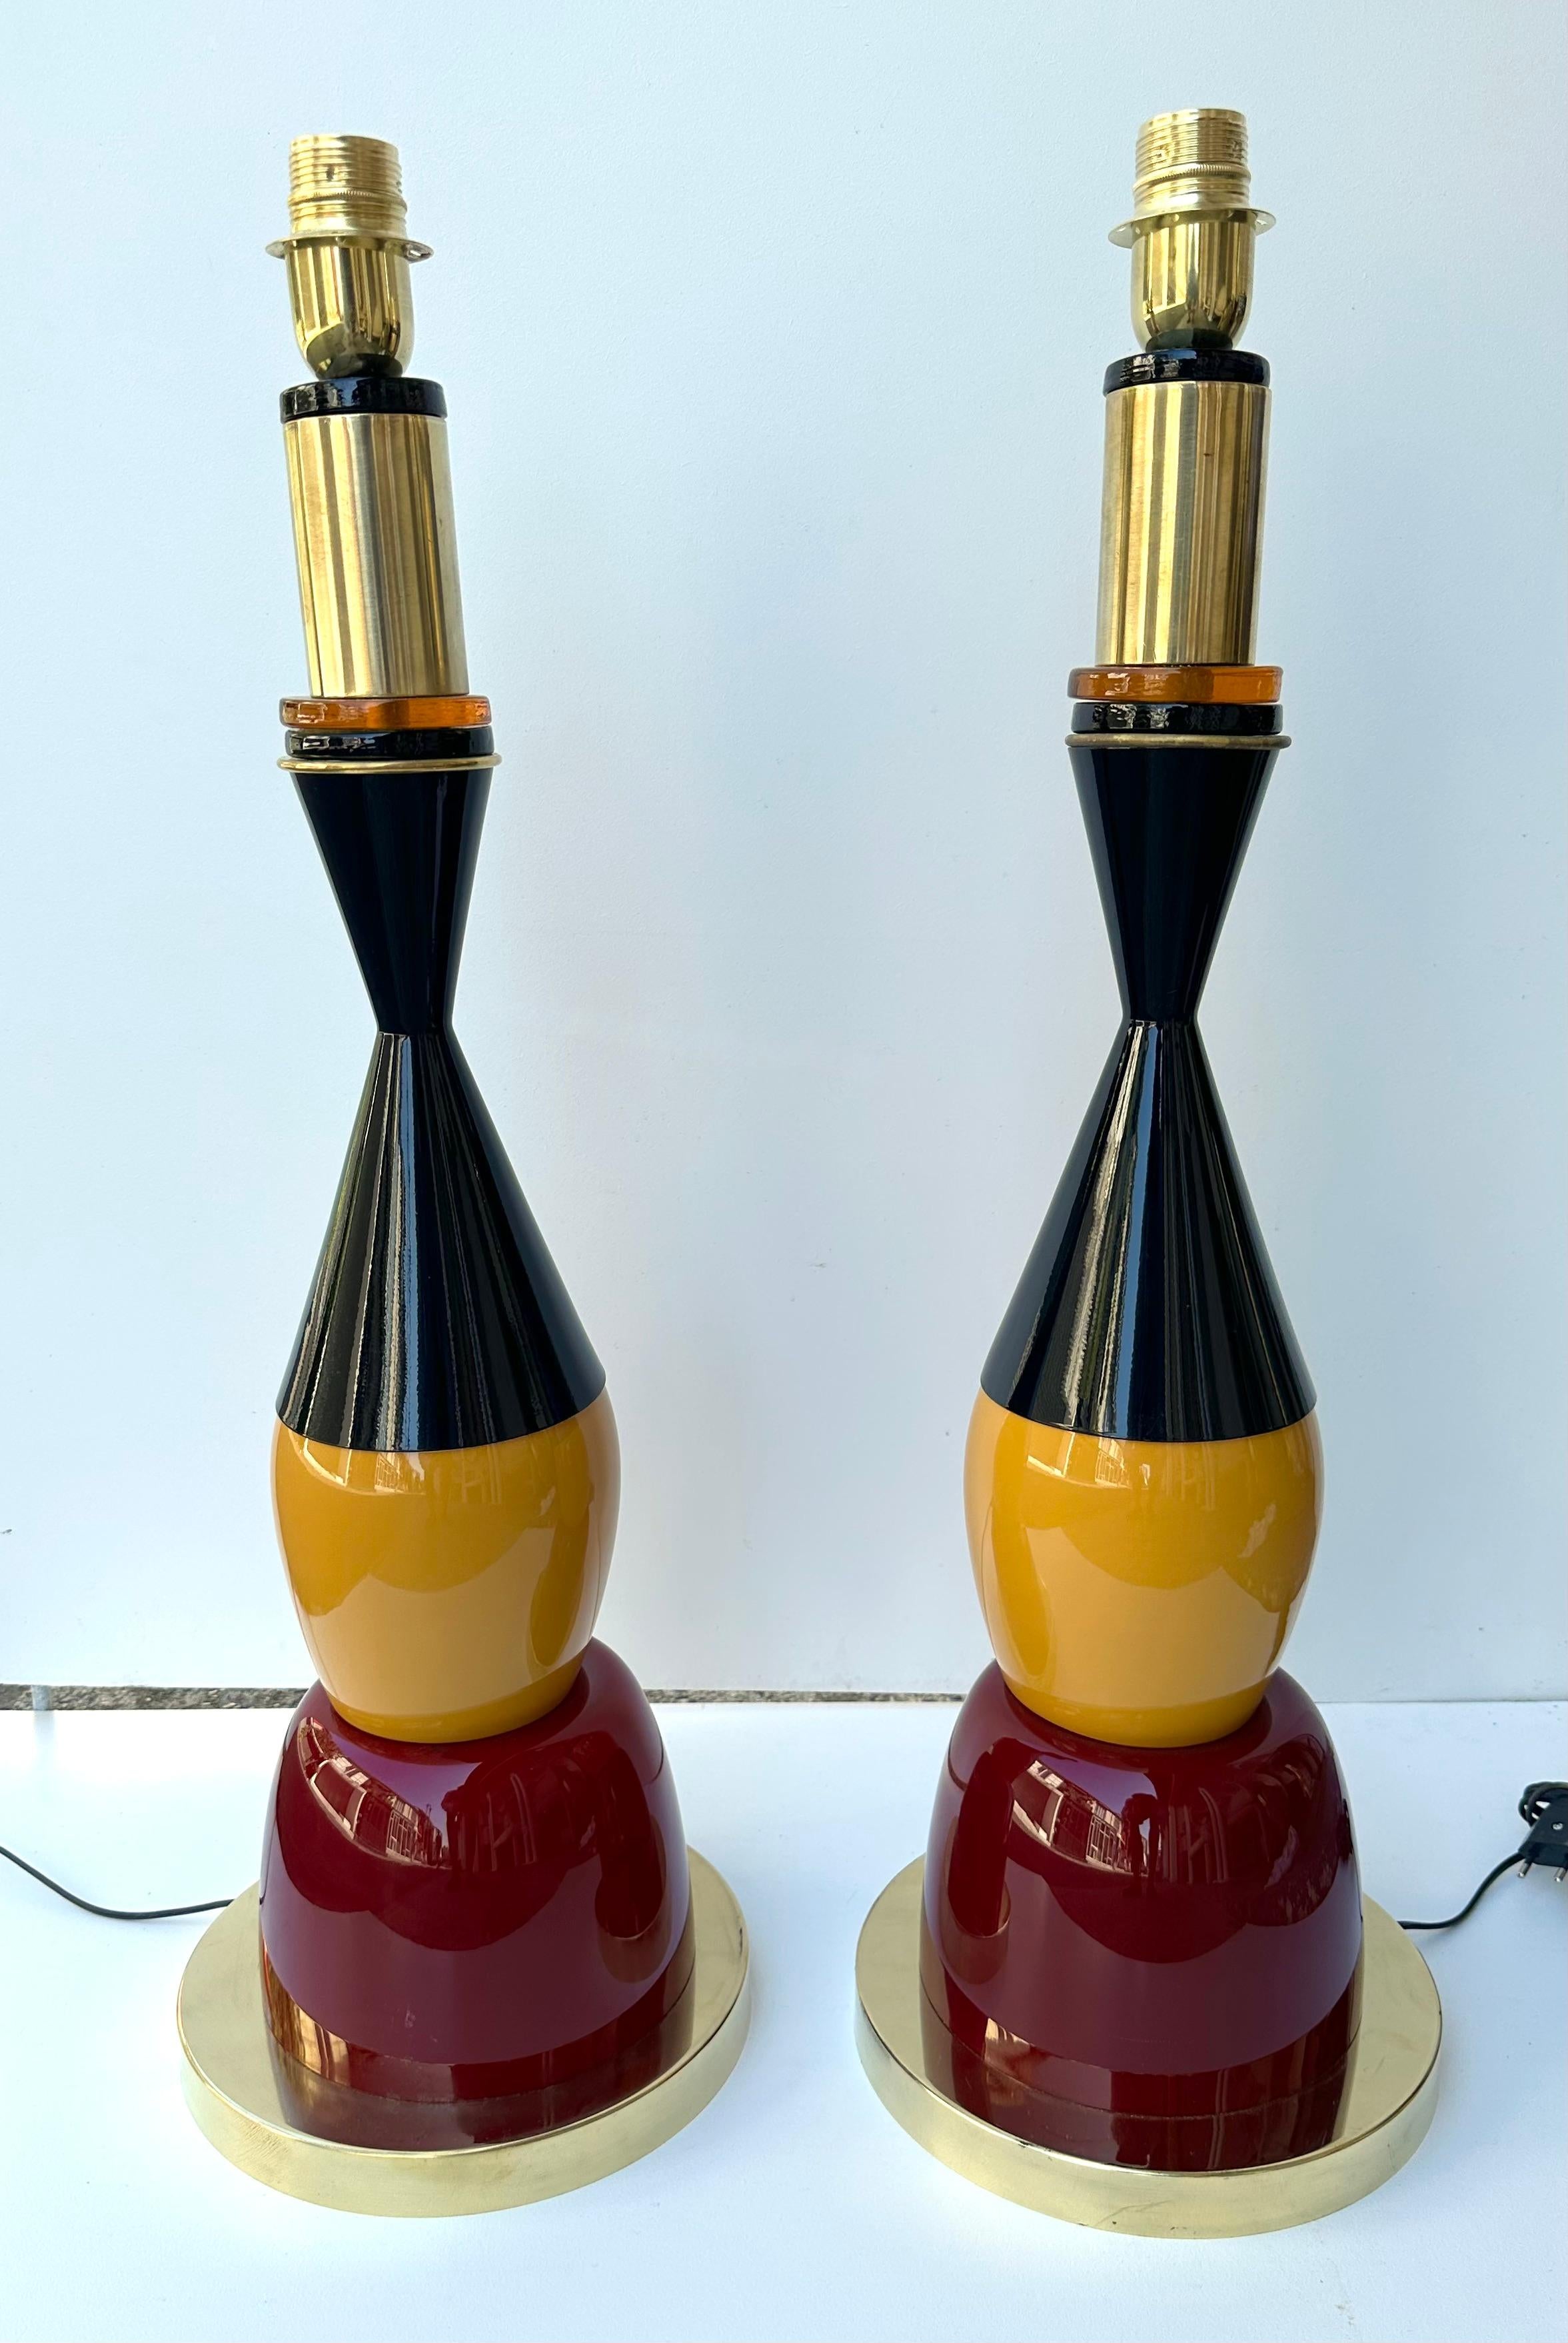 Pair of table or bedside brass lamps, Murano glass and black lacquered metal. Contemporary work from a small italian artisanal workshop in a Mid-Century Modern Space Age Hollywood Regency, Memphis 1980s mood.

Demo Shades are not